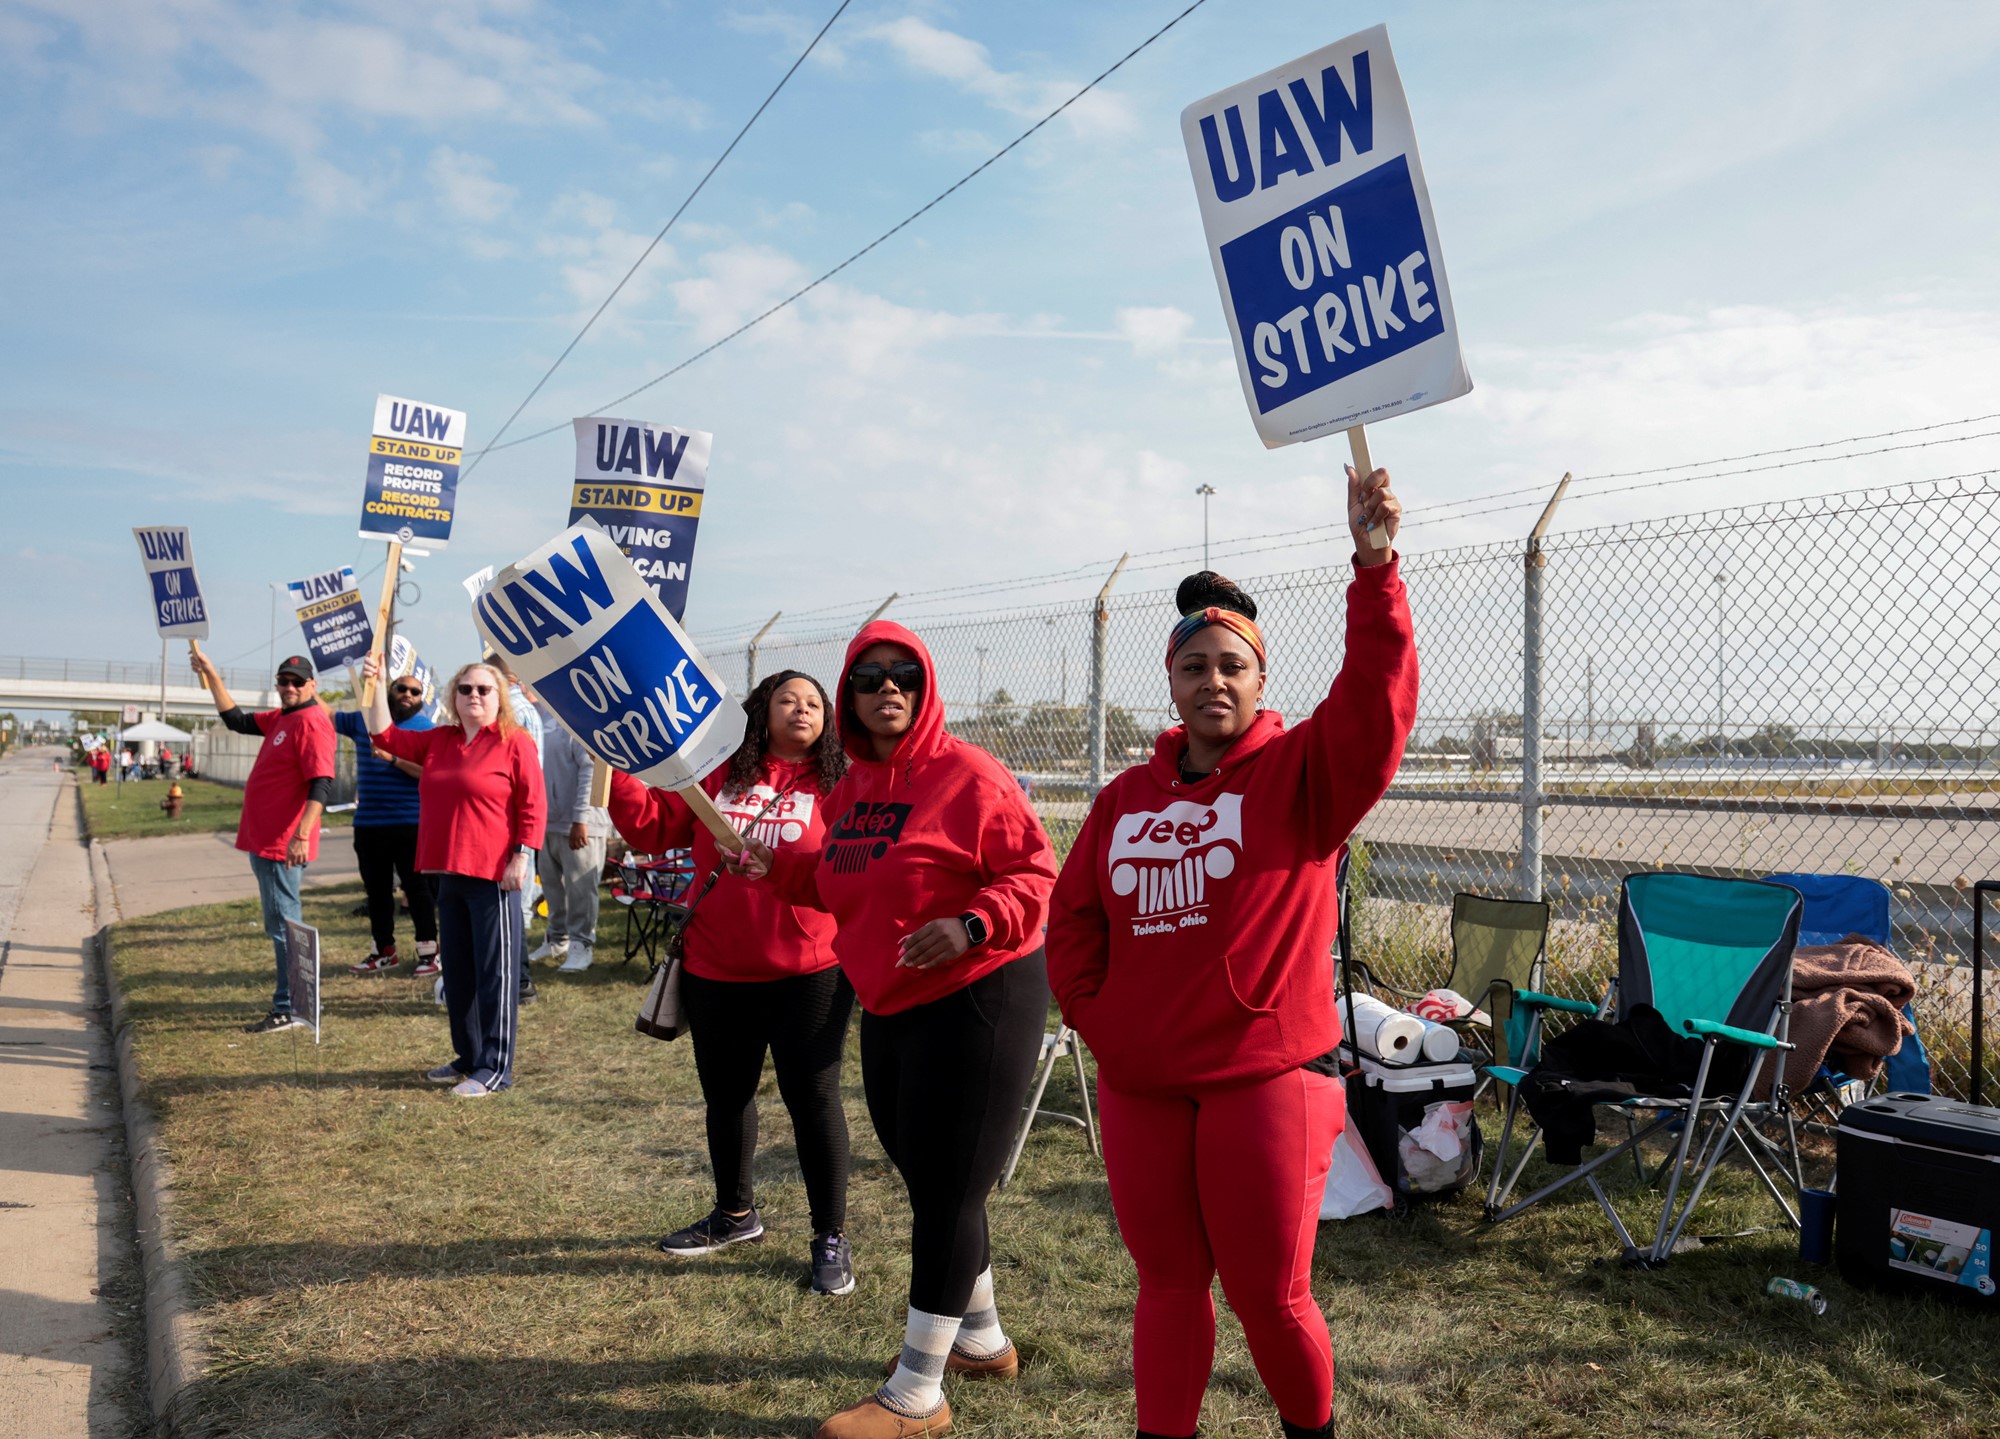 Workers wearing red hoodies and shirts hold picket signs outside a plant.